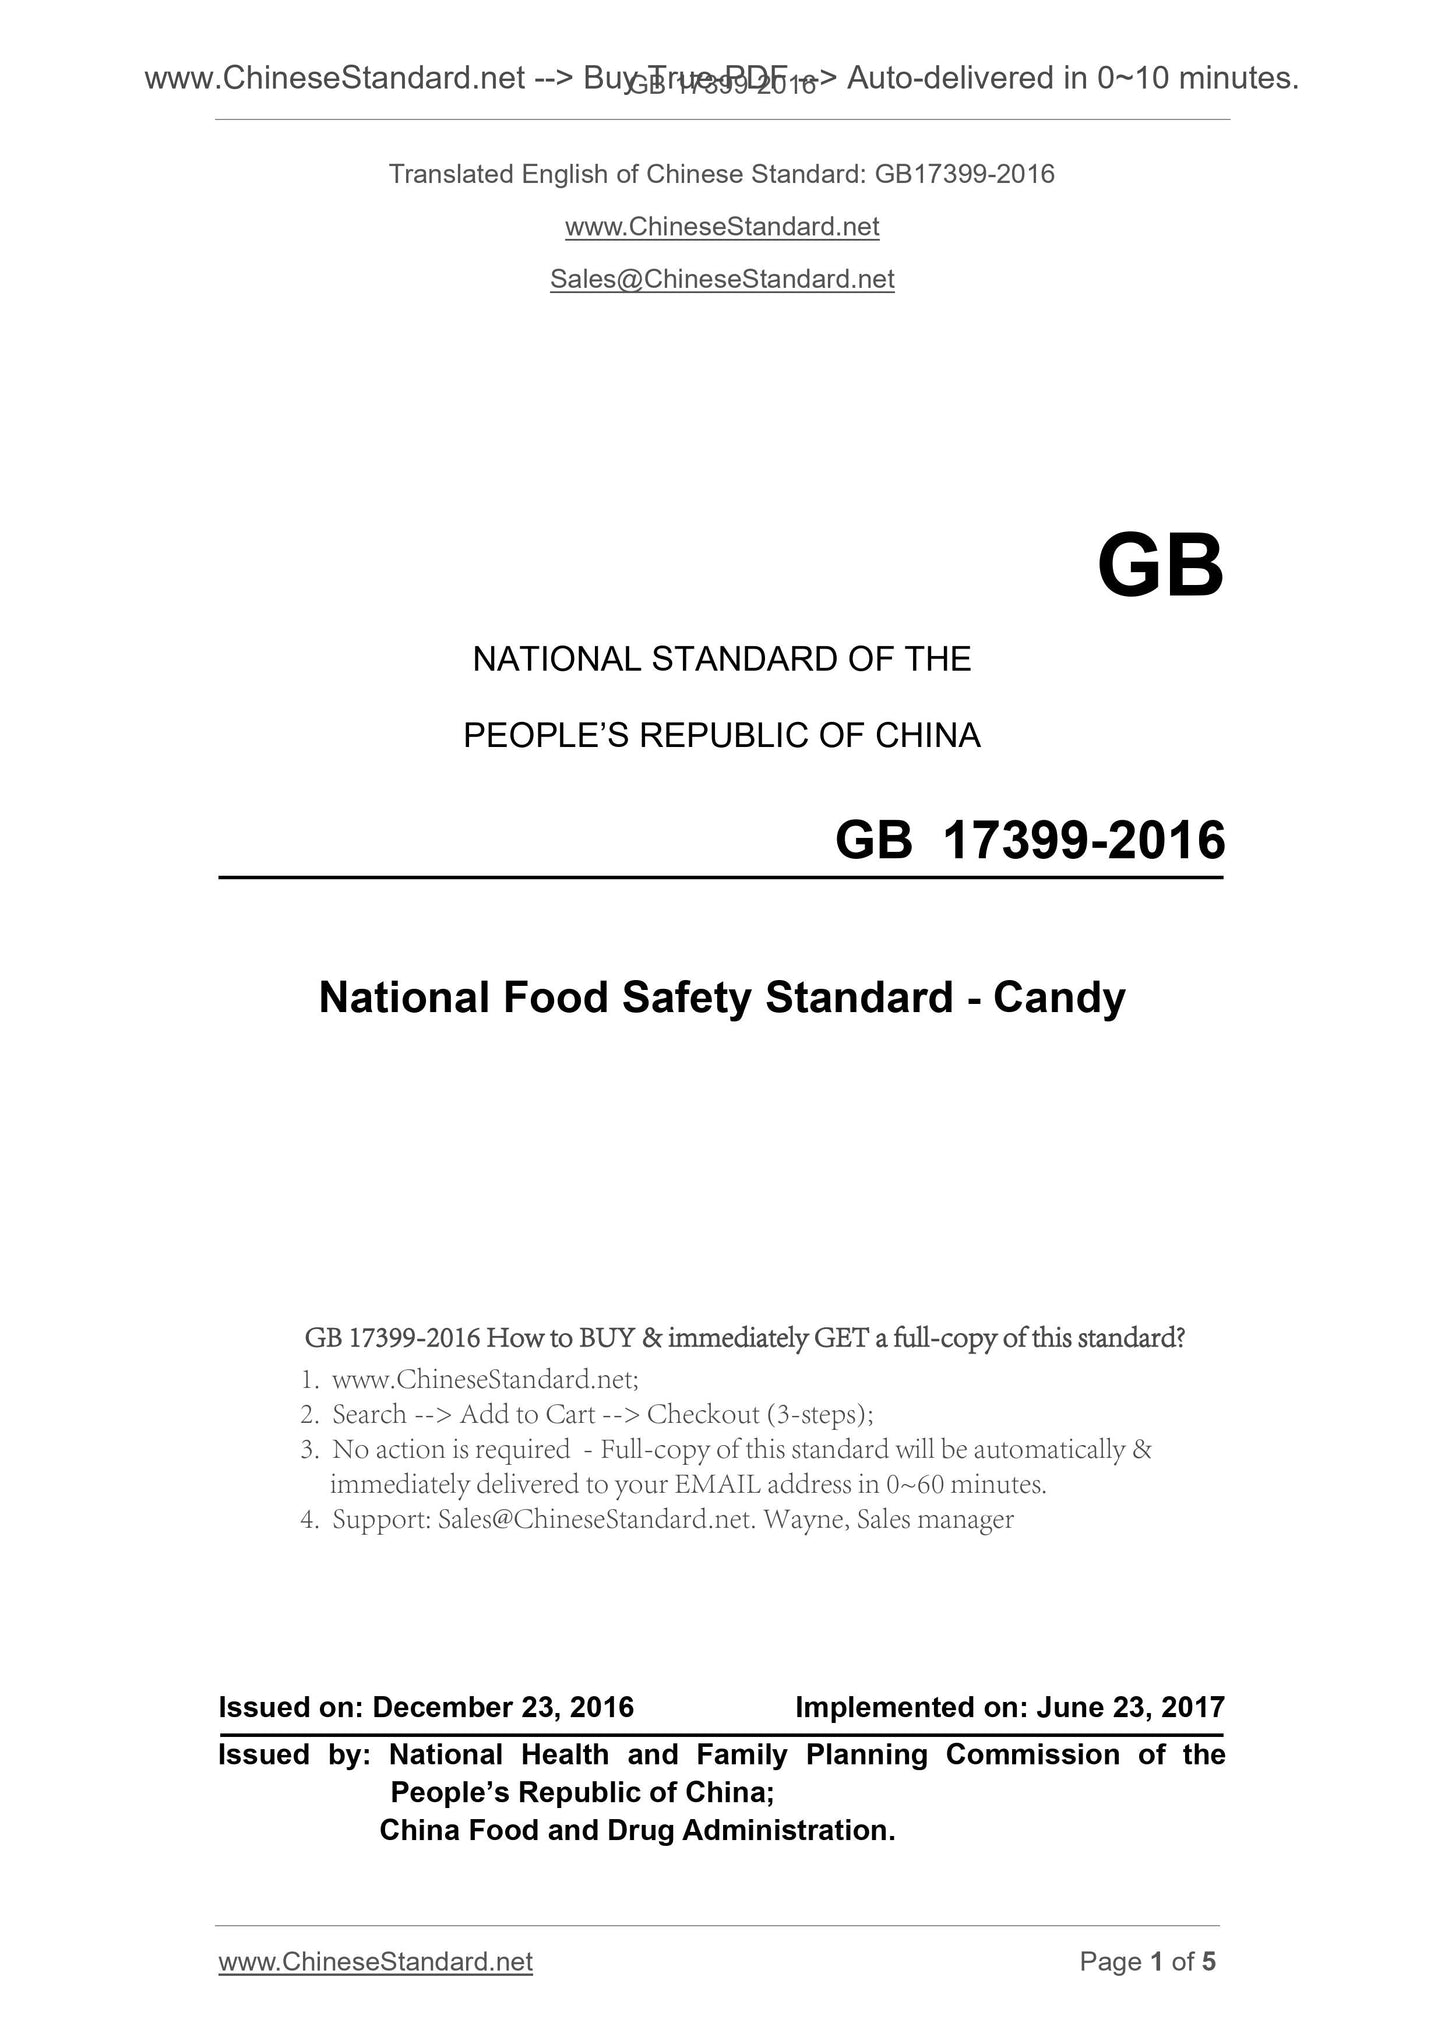 GB 17399-2016 Page 1